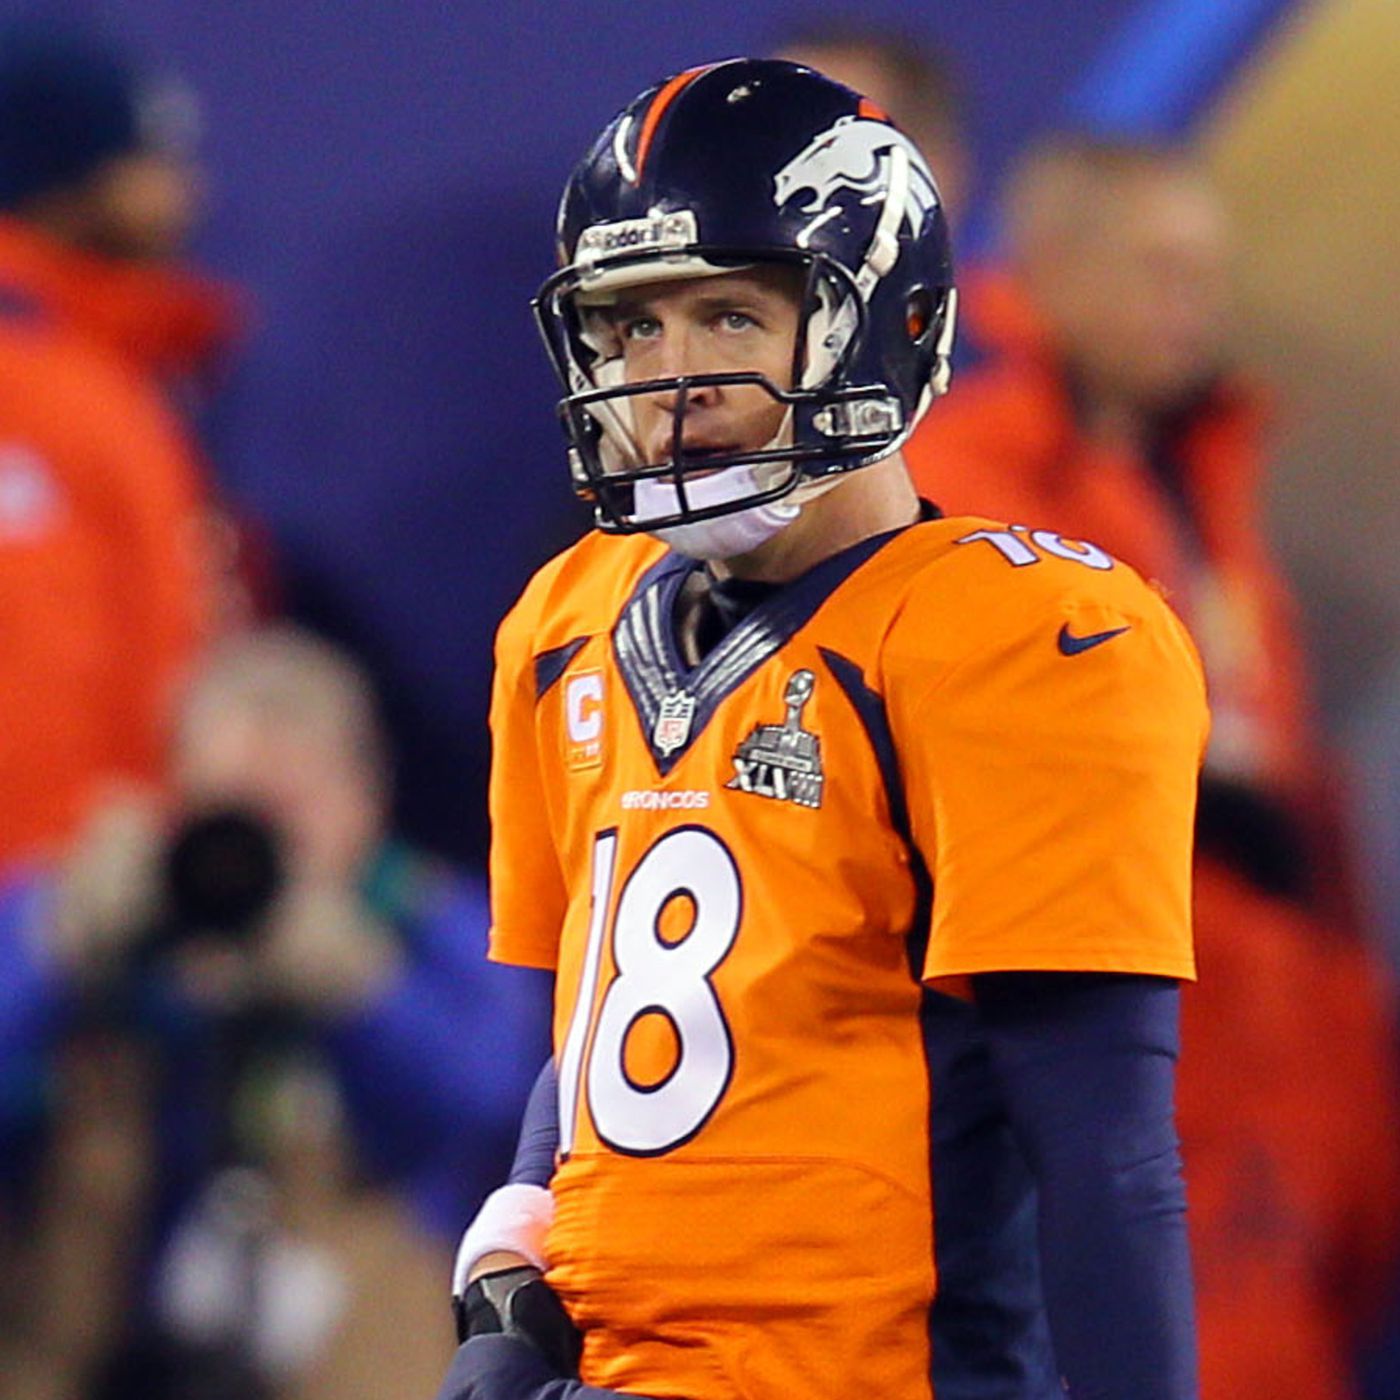 Peyton Manning has checkered record in Super Bowl 